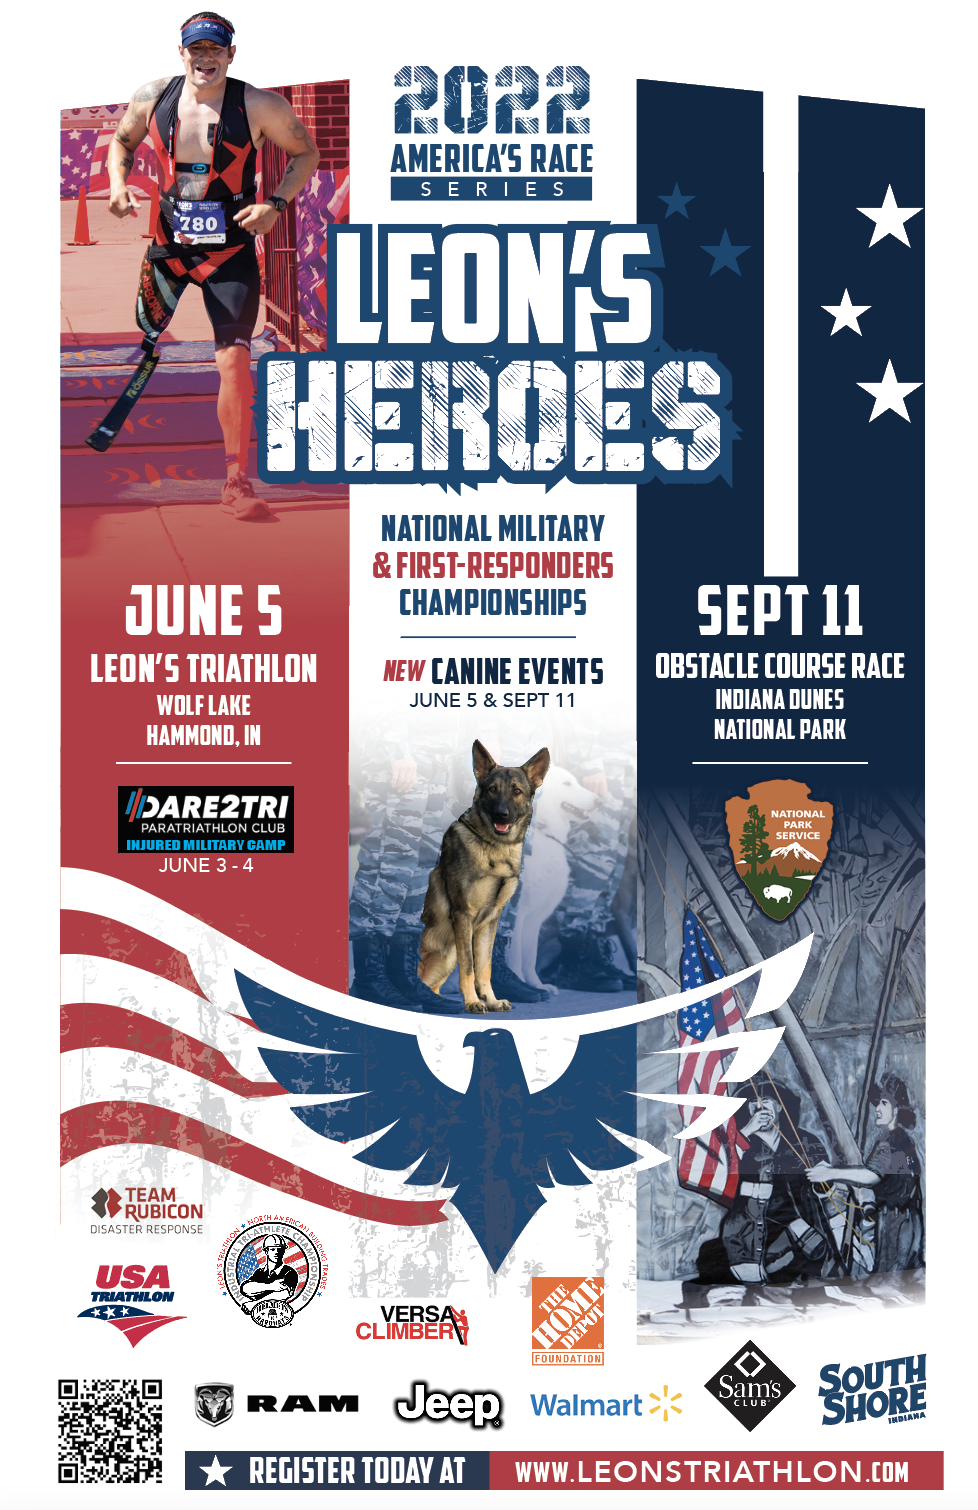 We will have Leon’s Triathlon on Sunday, June 5, 2022 at Wolf Lake in Hammond, Indiana and Leon’s Heroes Obstacle Course Race on Sunday, September 11, 2022 at Indiana Dunes National Park.